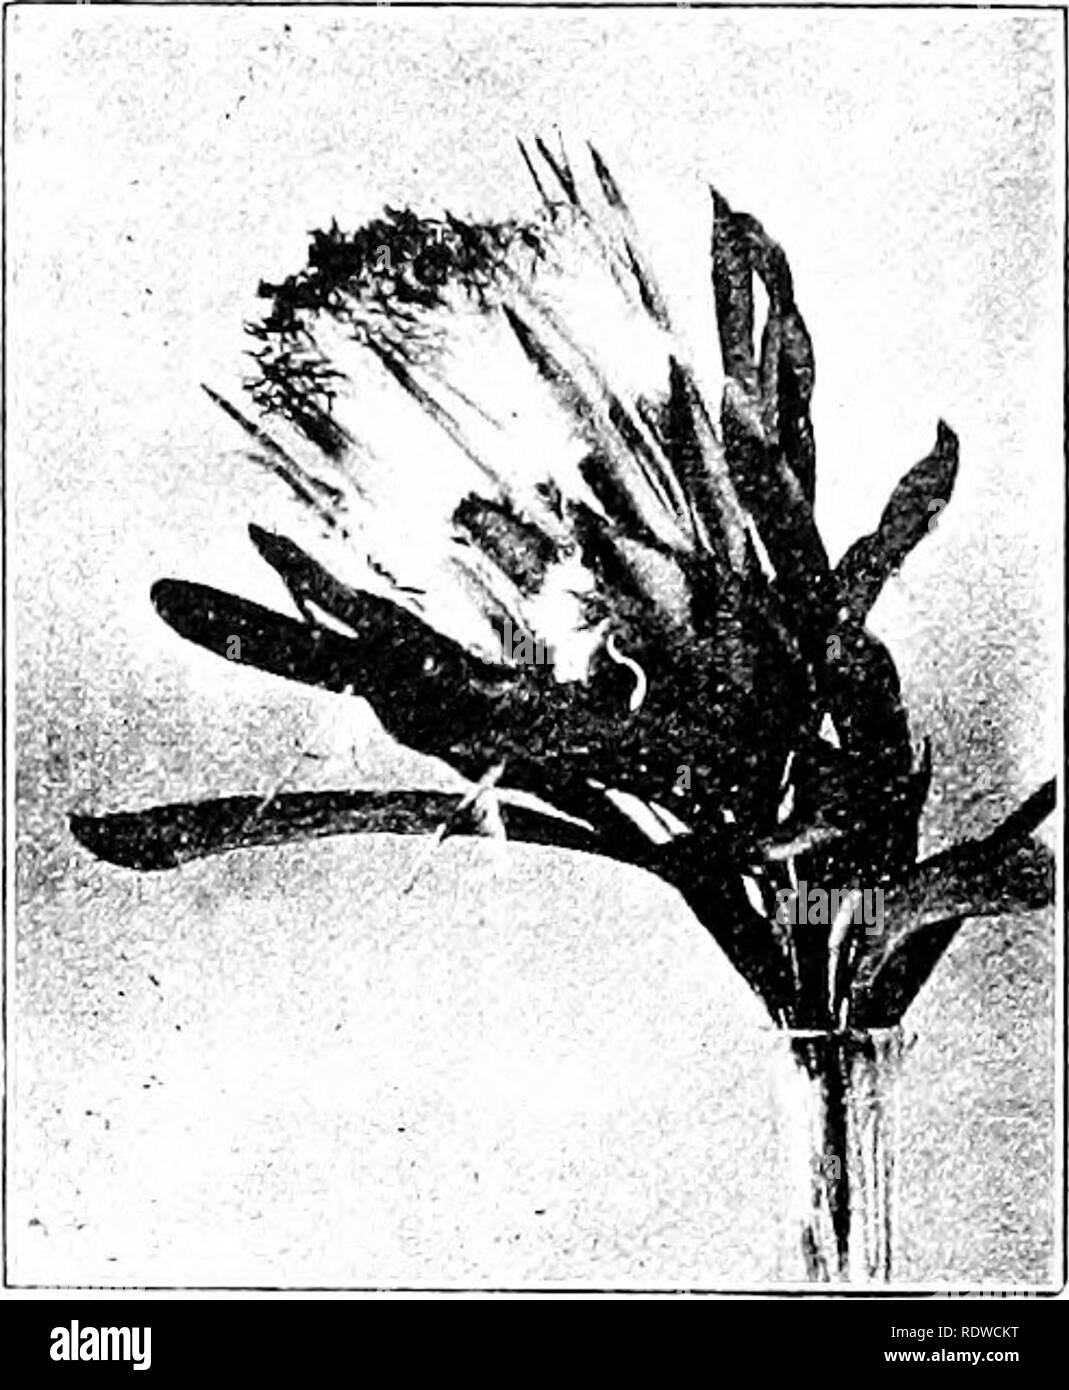 . Plants and their ways in South Africa. Botany; Botany. 290 Plants and their Ways in South Africa. F'IG. 261.—Protea macrophylla, R. Br. Leucospermum lacks the involucre that makes Protea conspicuous, but each flower is subtended by a well-developed bract. The claws of the peri- anth usually remain united or they may separate at the tips. The styles are deciduous and the fruit smooth. Trees or shrubs sometimes trailing. Flowers usually yellow (rarely red). About thirty species, mostly at the coast but ex- tending to Rhodesia. Mimetes has the habit of Leucospermum, but the flowers are reddish  Stock Photo